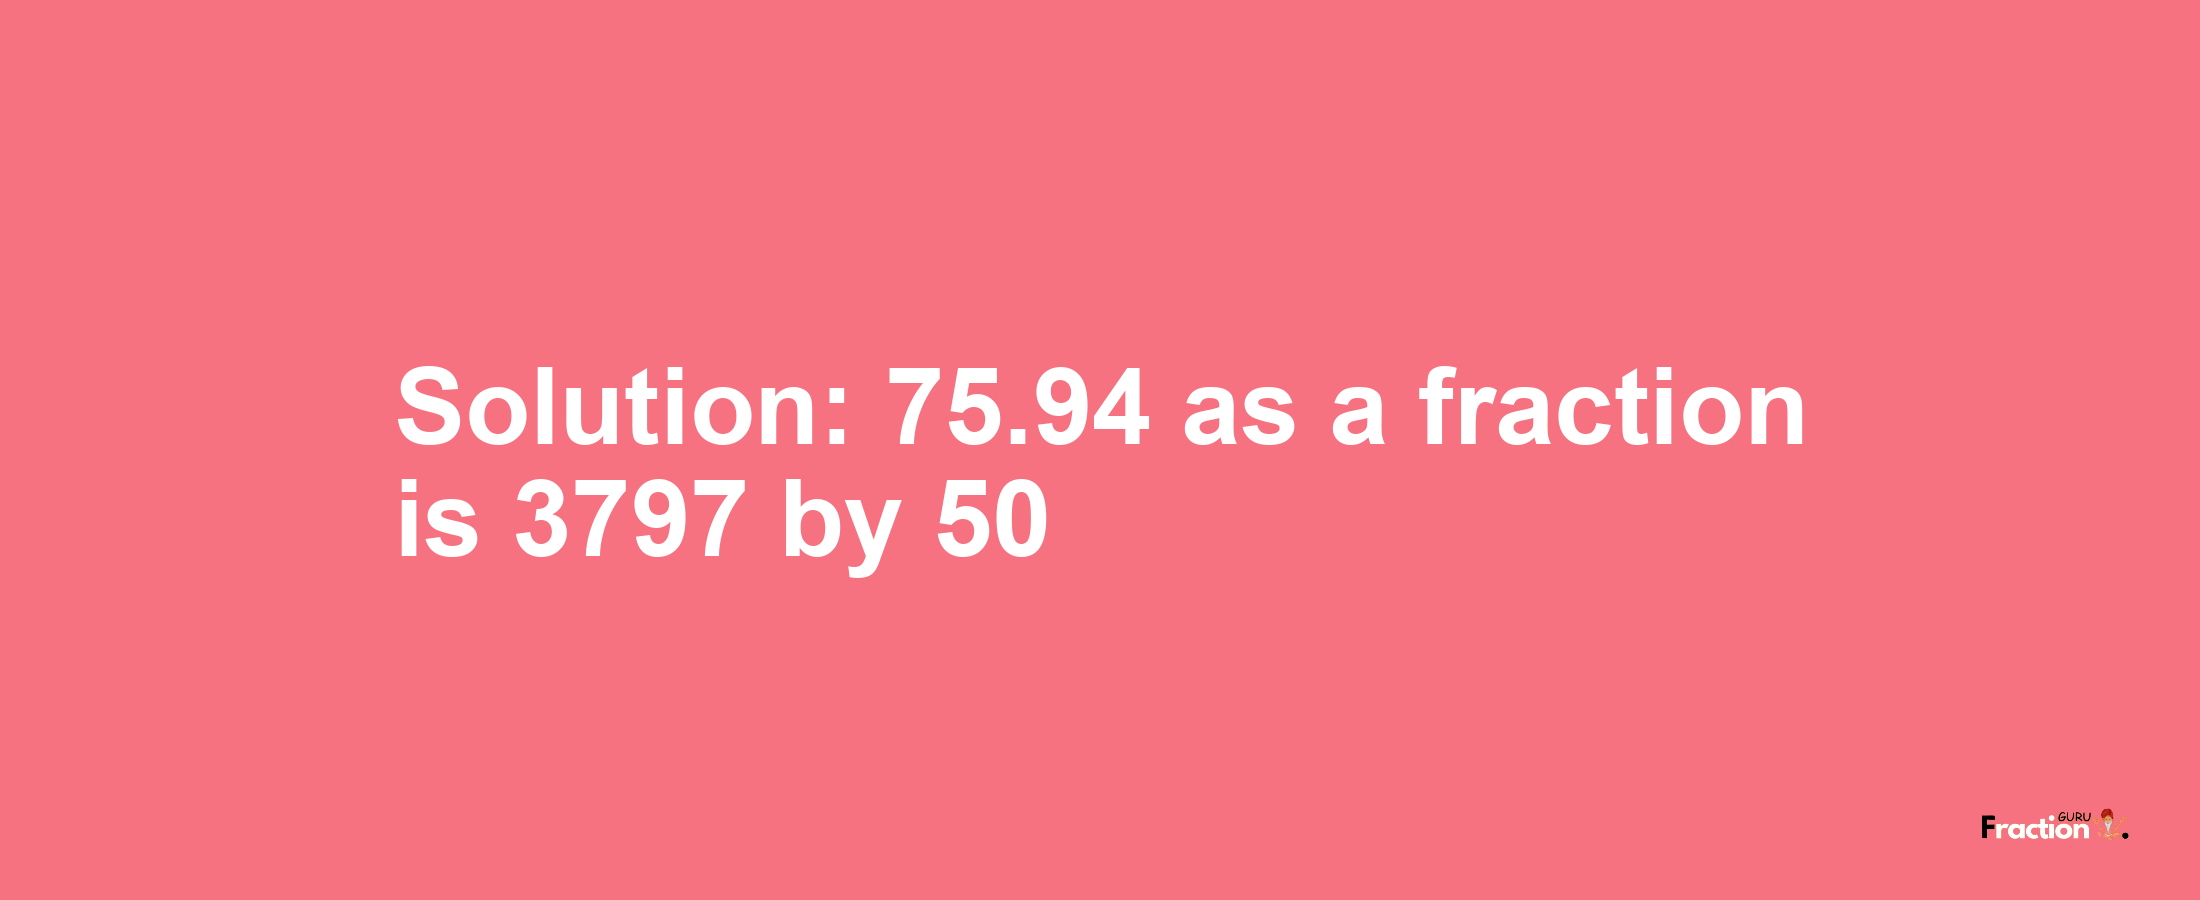 Solution:75.94 as a fraction is 3797/50